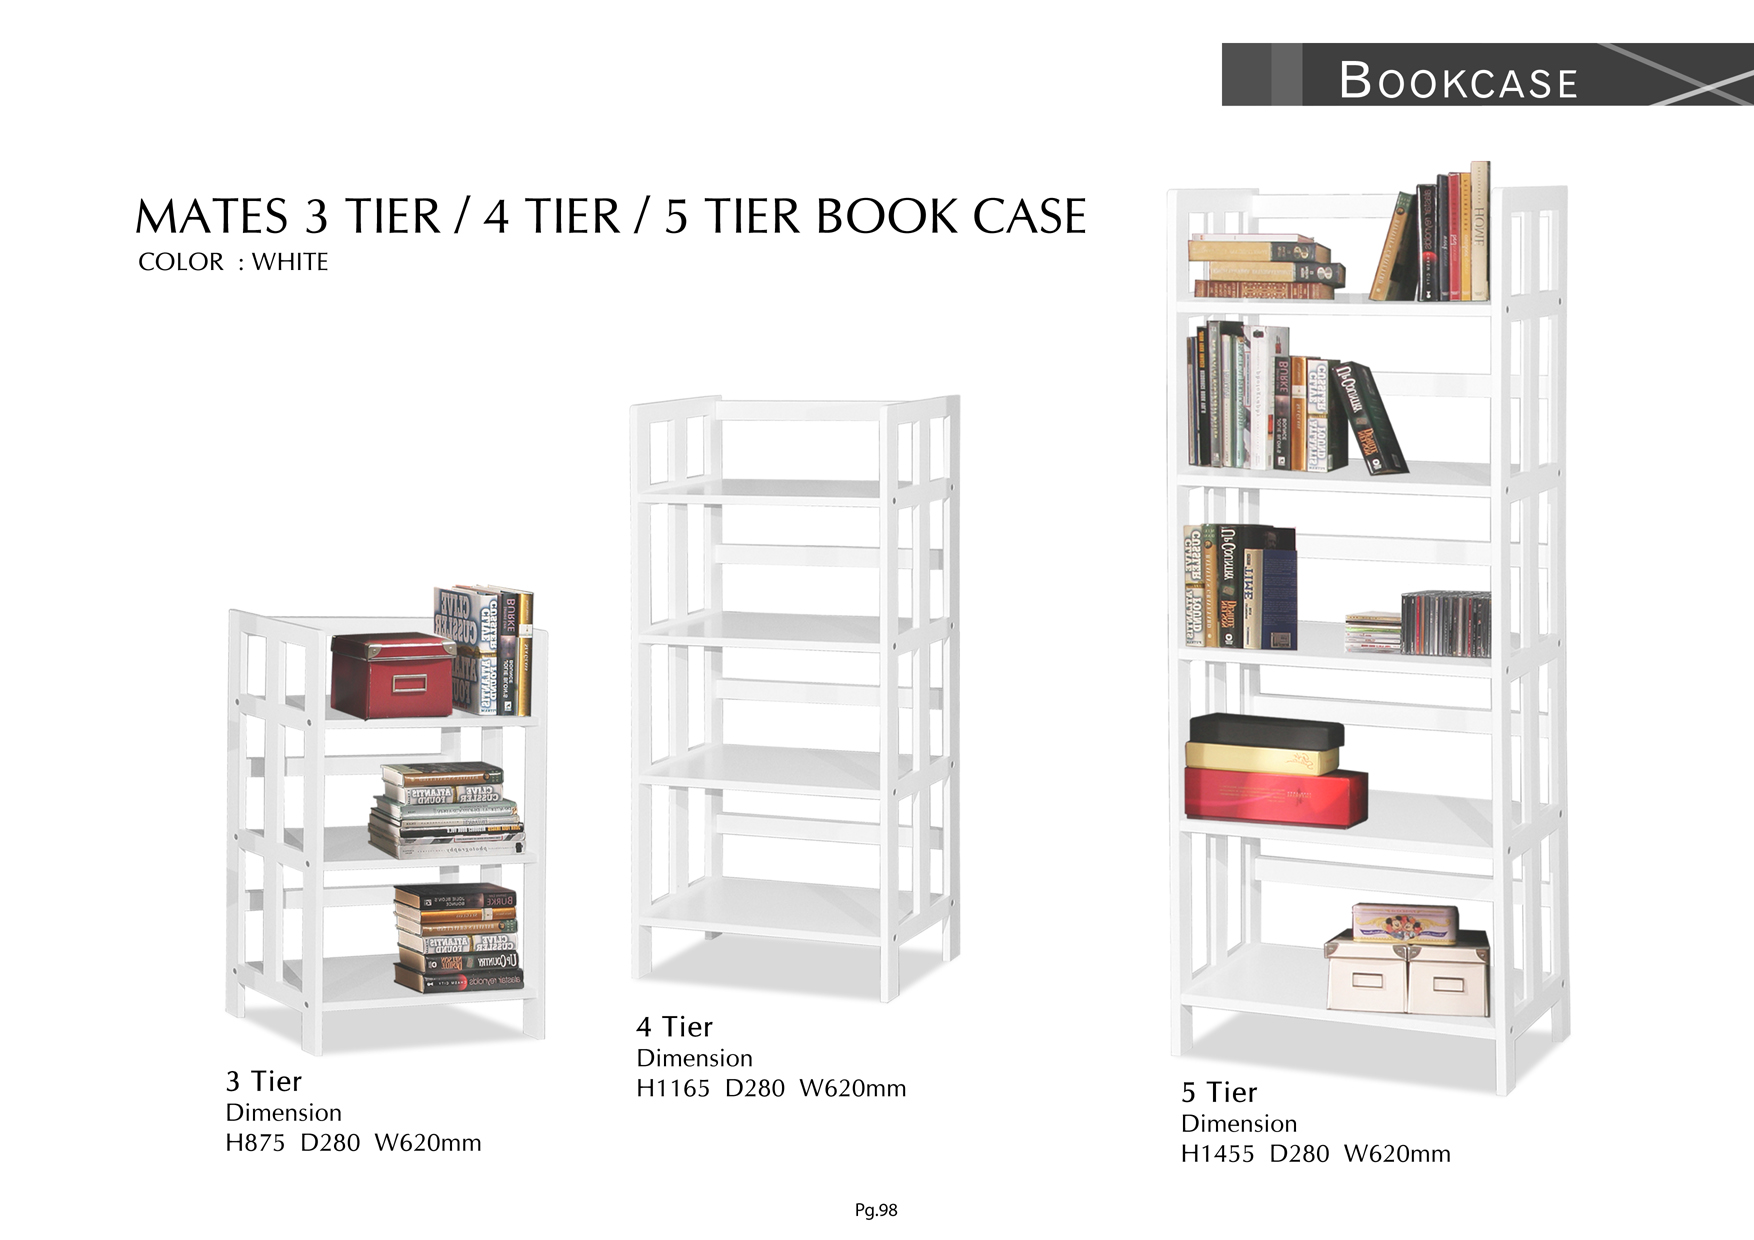 Product: PG98. MATES TIER BOOK CASE